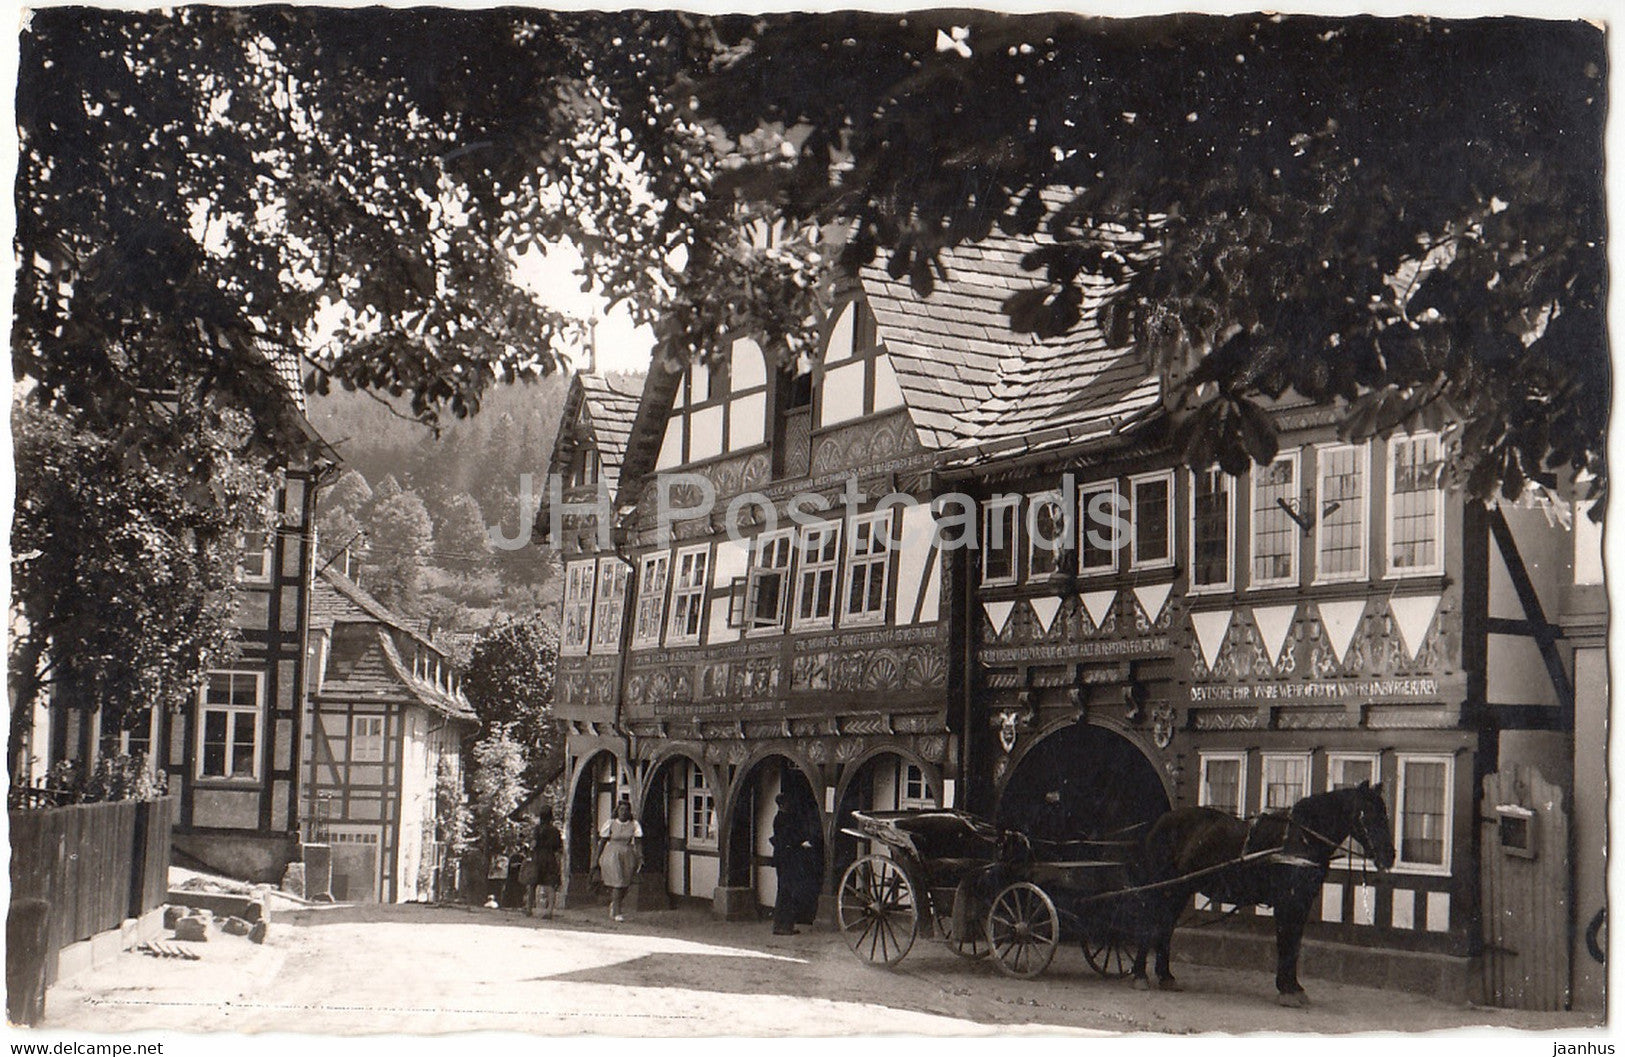 Schwalenberg I L - horse carriage - old postcard - 1954 - Germany - used - JH Postcards